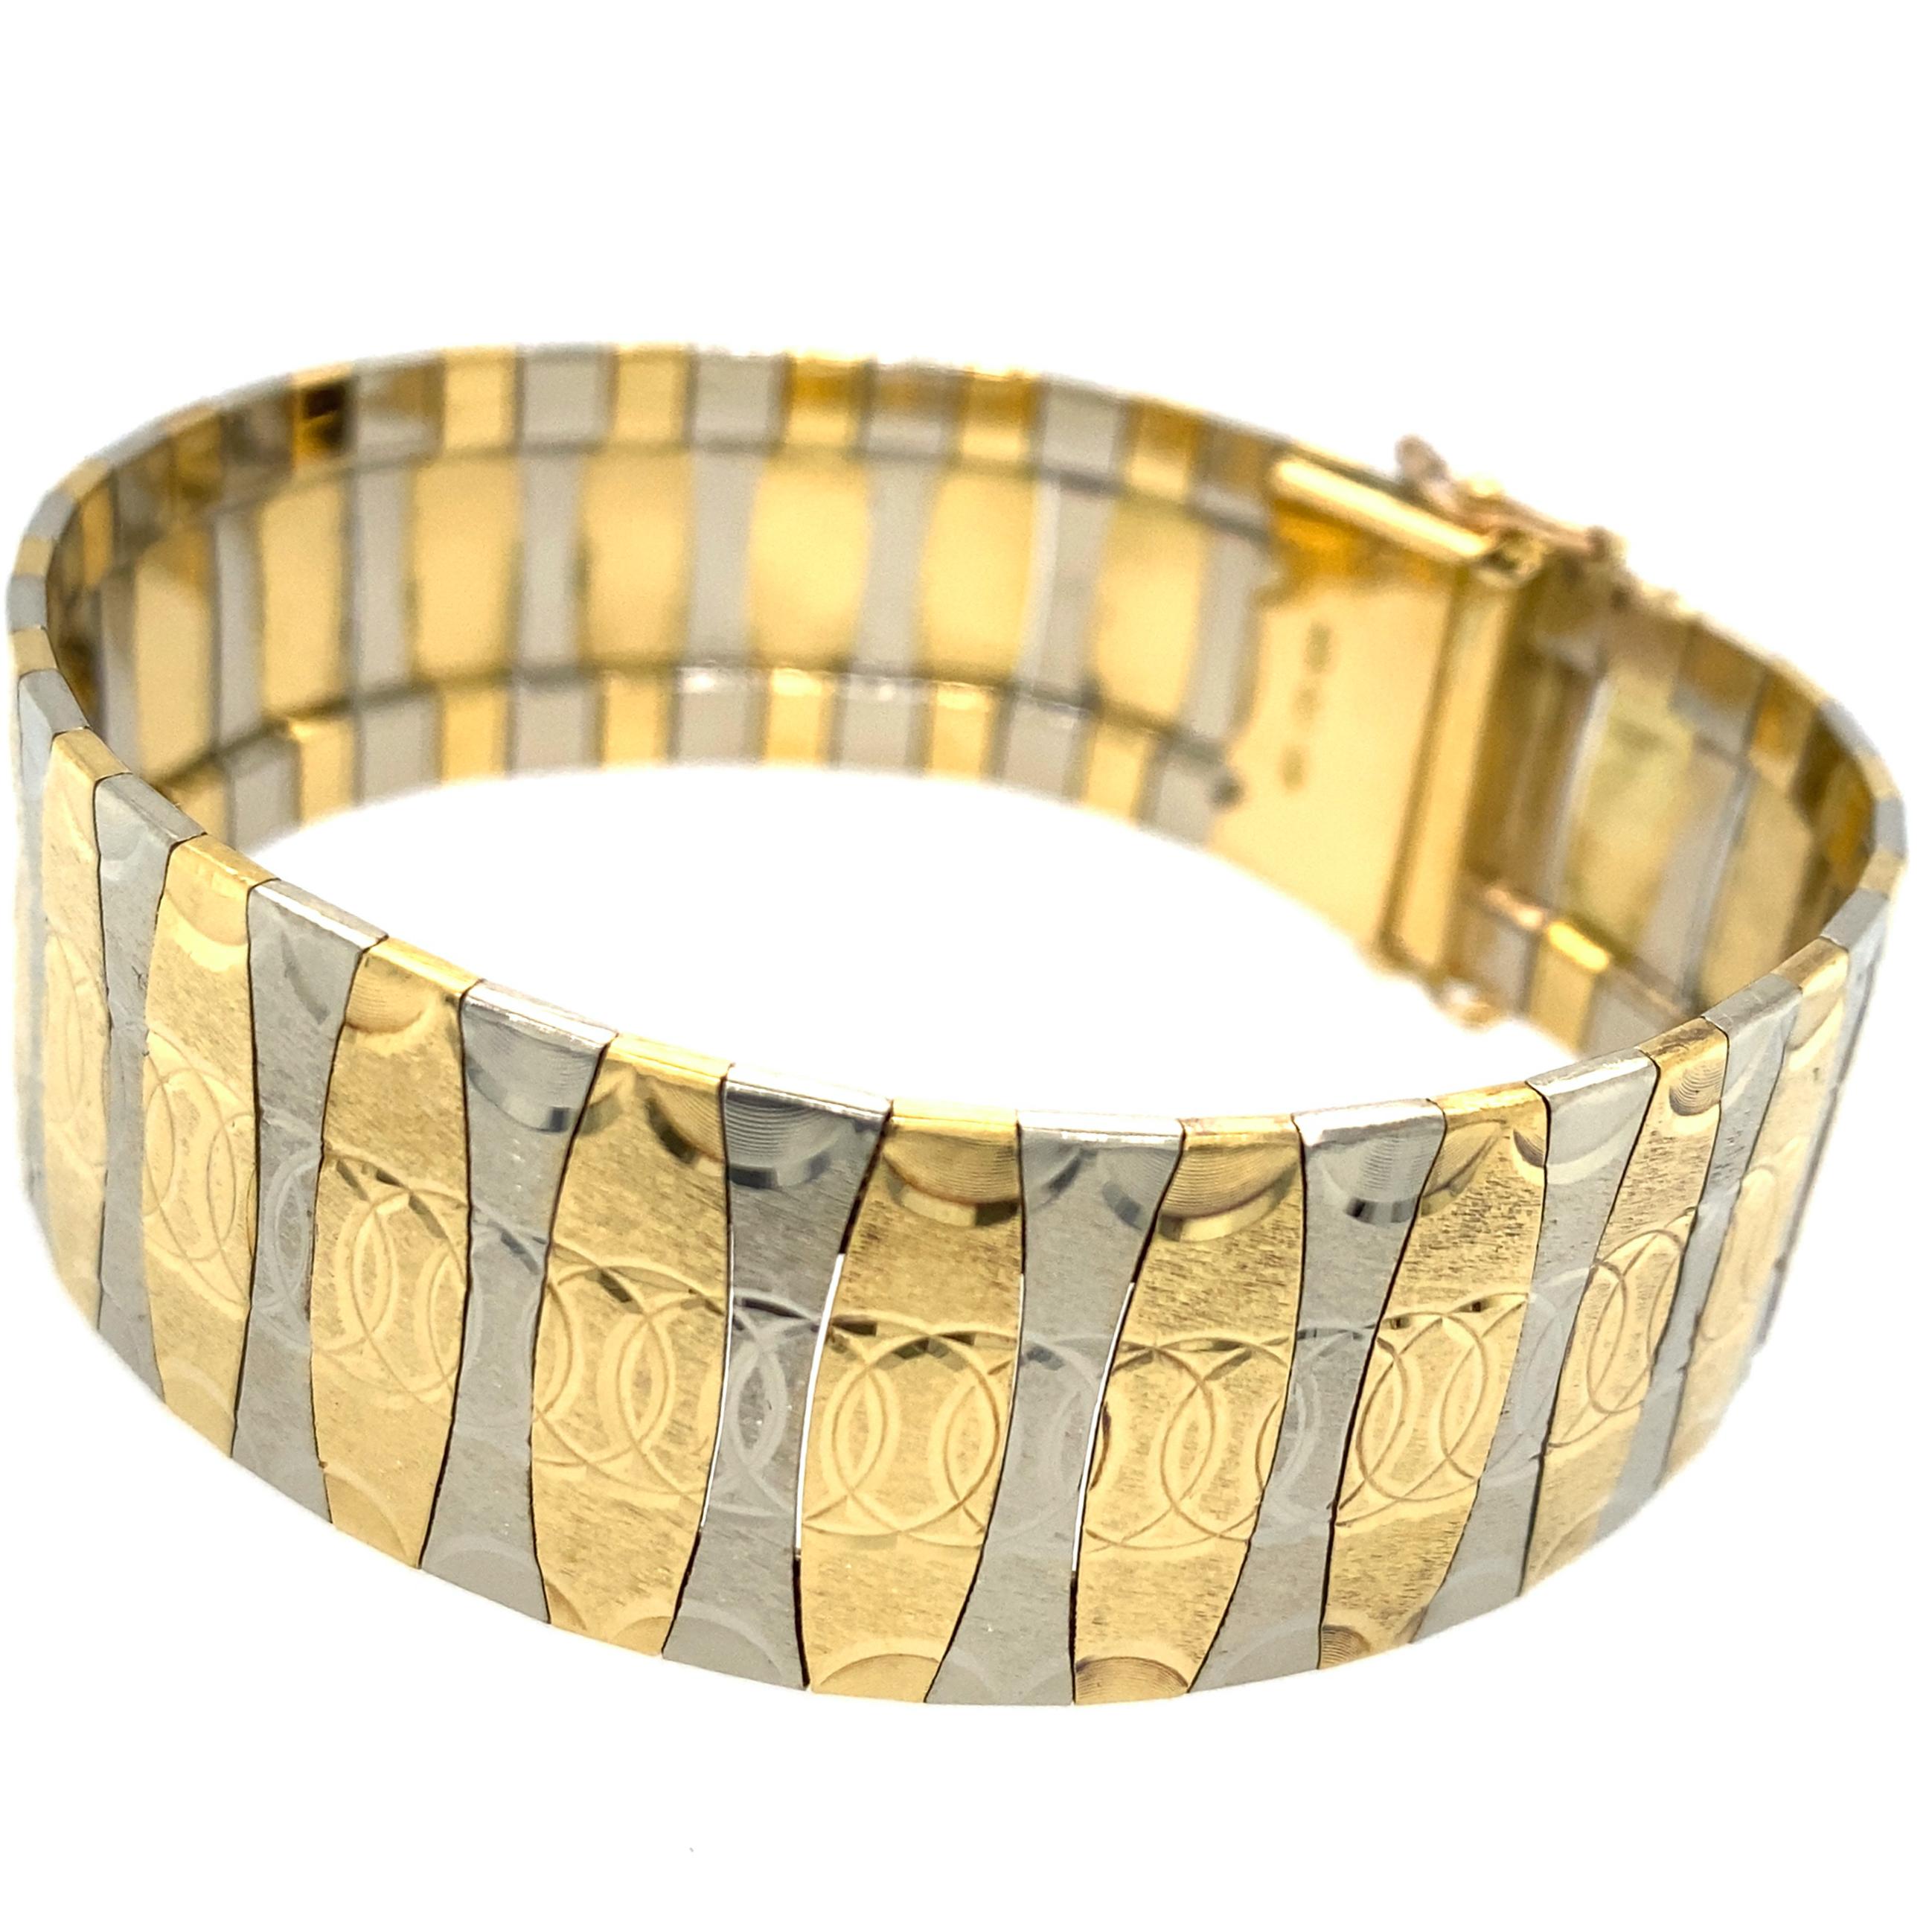 Italian 18 Karat White & Yellow Gold Panel Links Cuff Bracelet In Excellent Condition For Sale In Sherman Oaks, CA